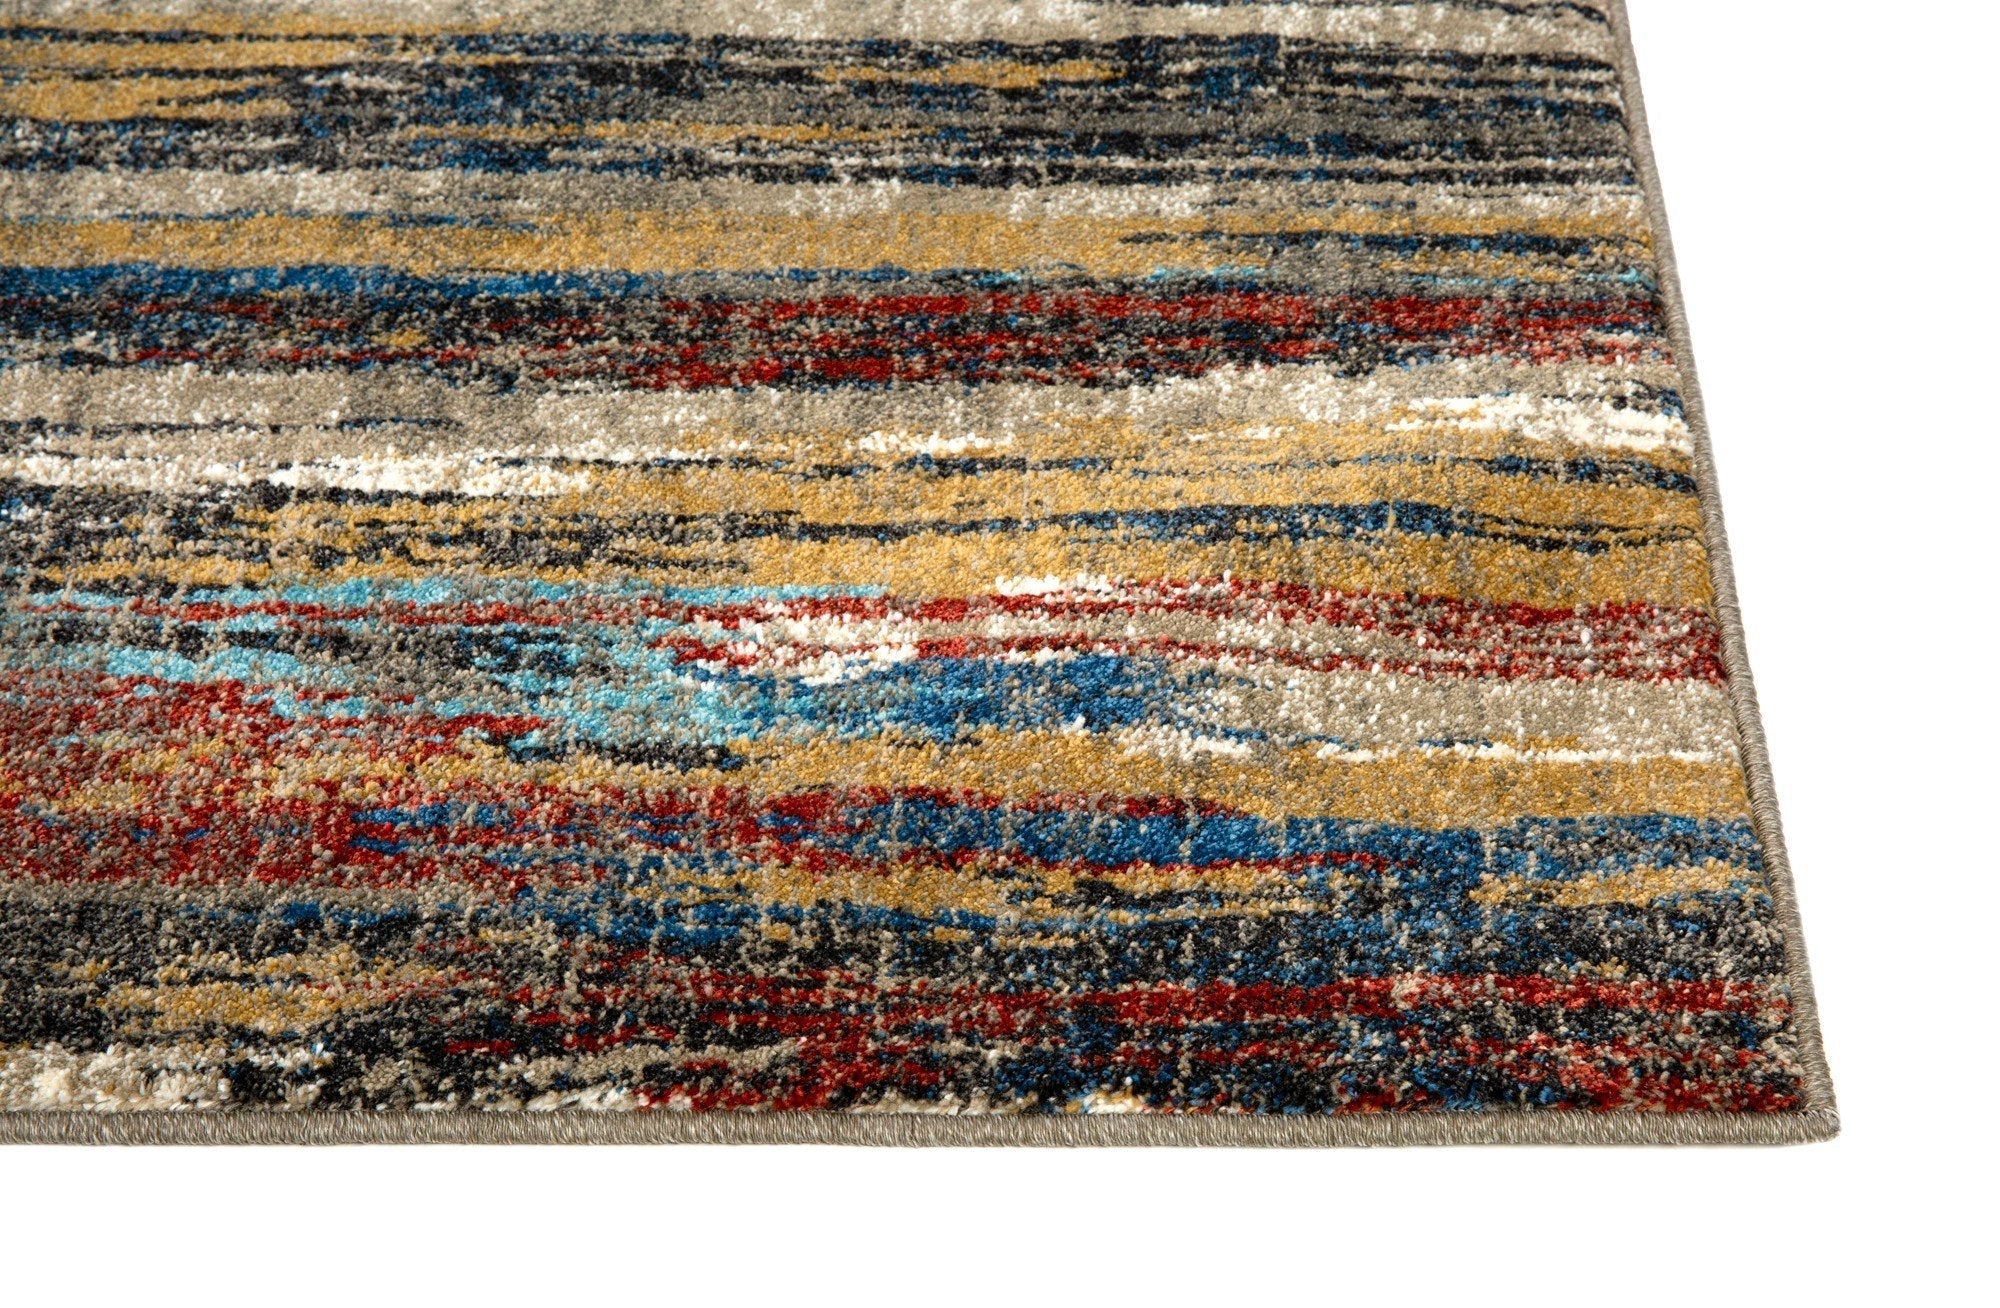 Stripped Design Rugs Blue Burgundy Multi Color Abstract  #96